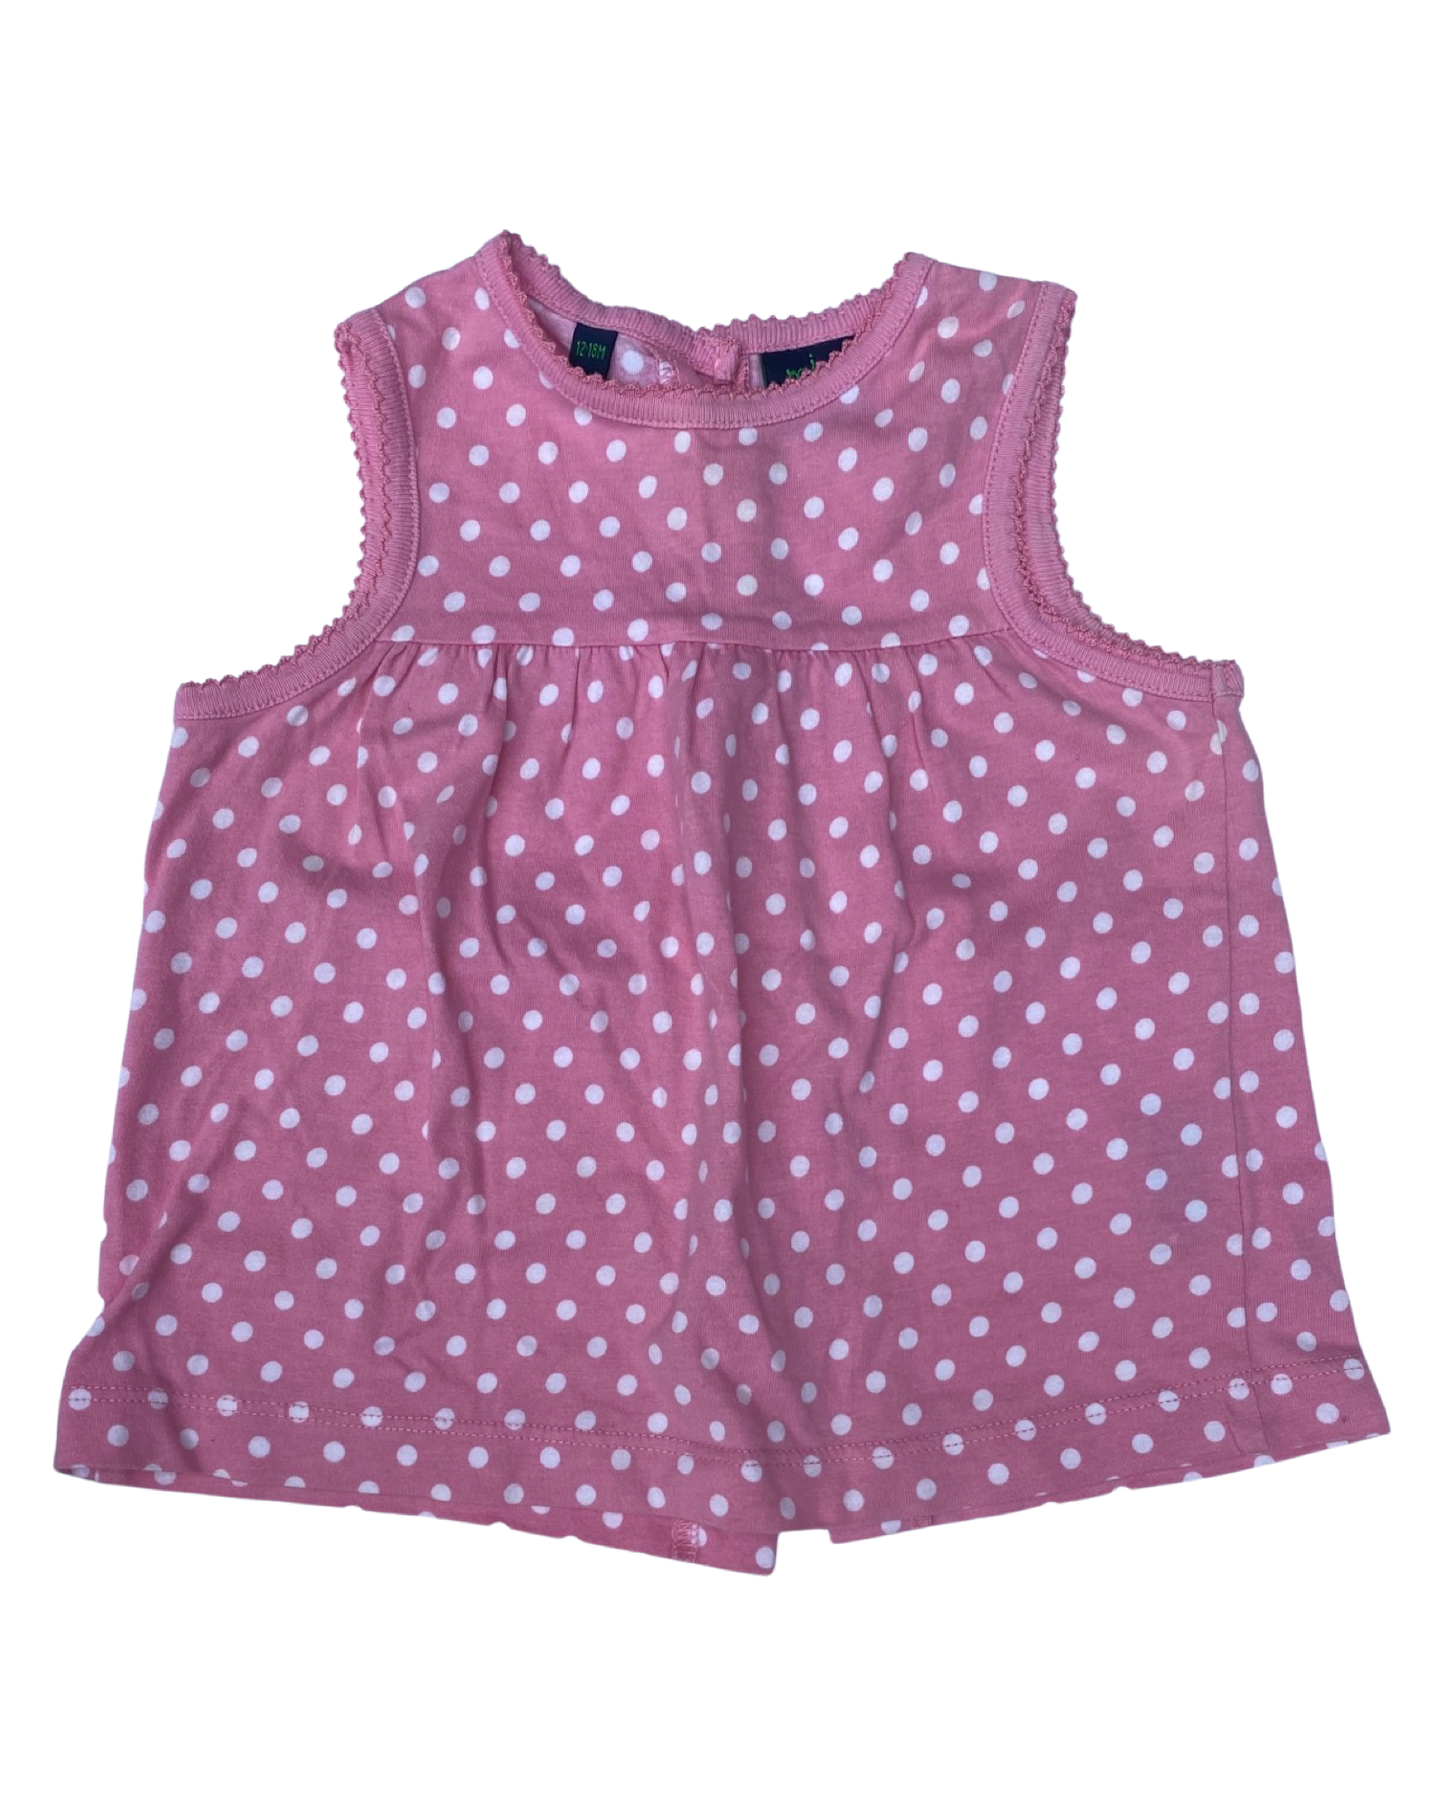 Baby Boden pink dotty sleeveless top (size 12-18mths)